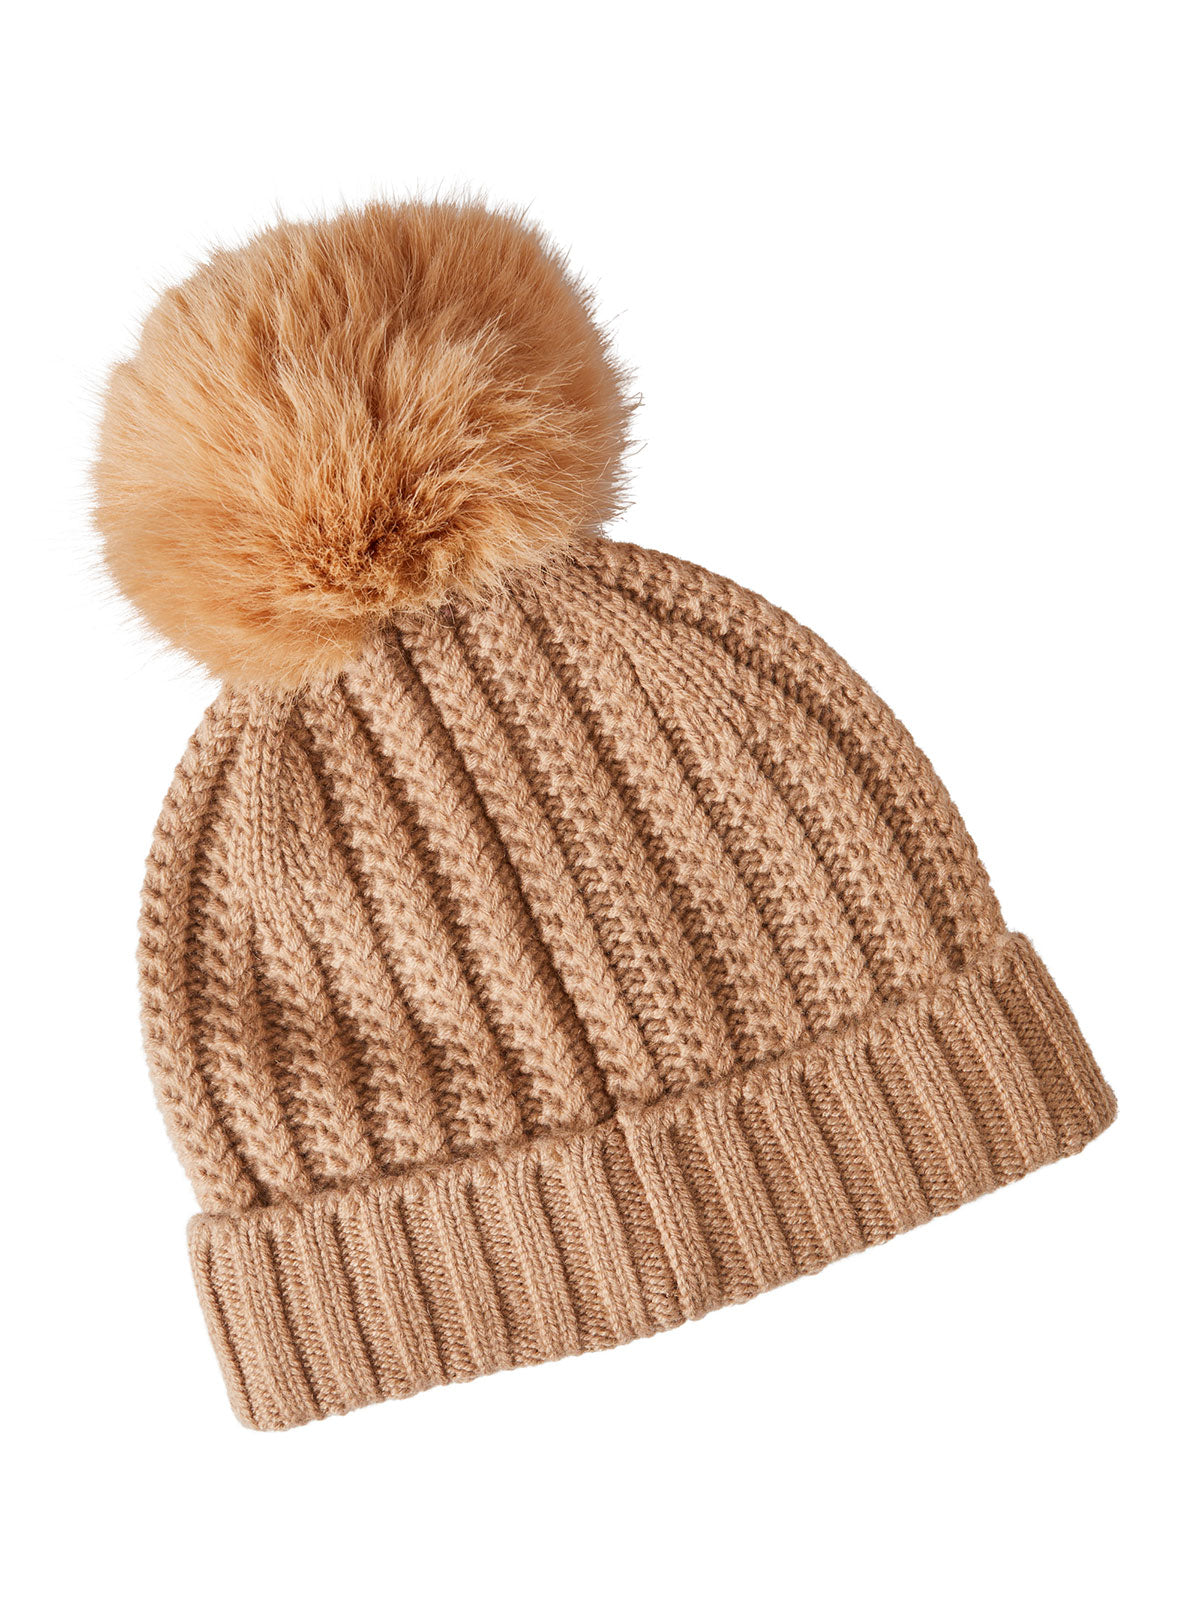 White Beanie Hat with Natural Pom